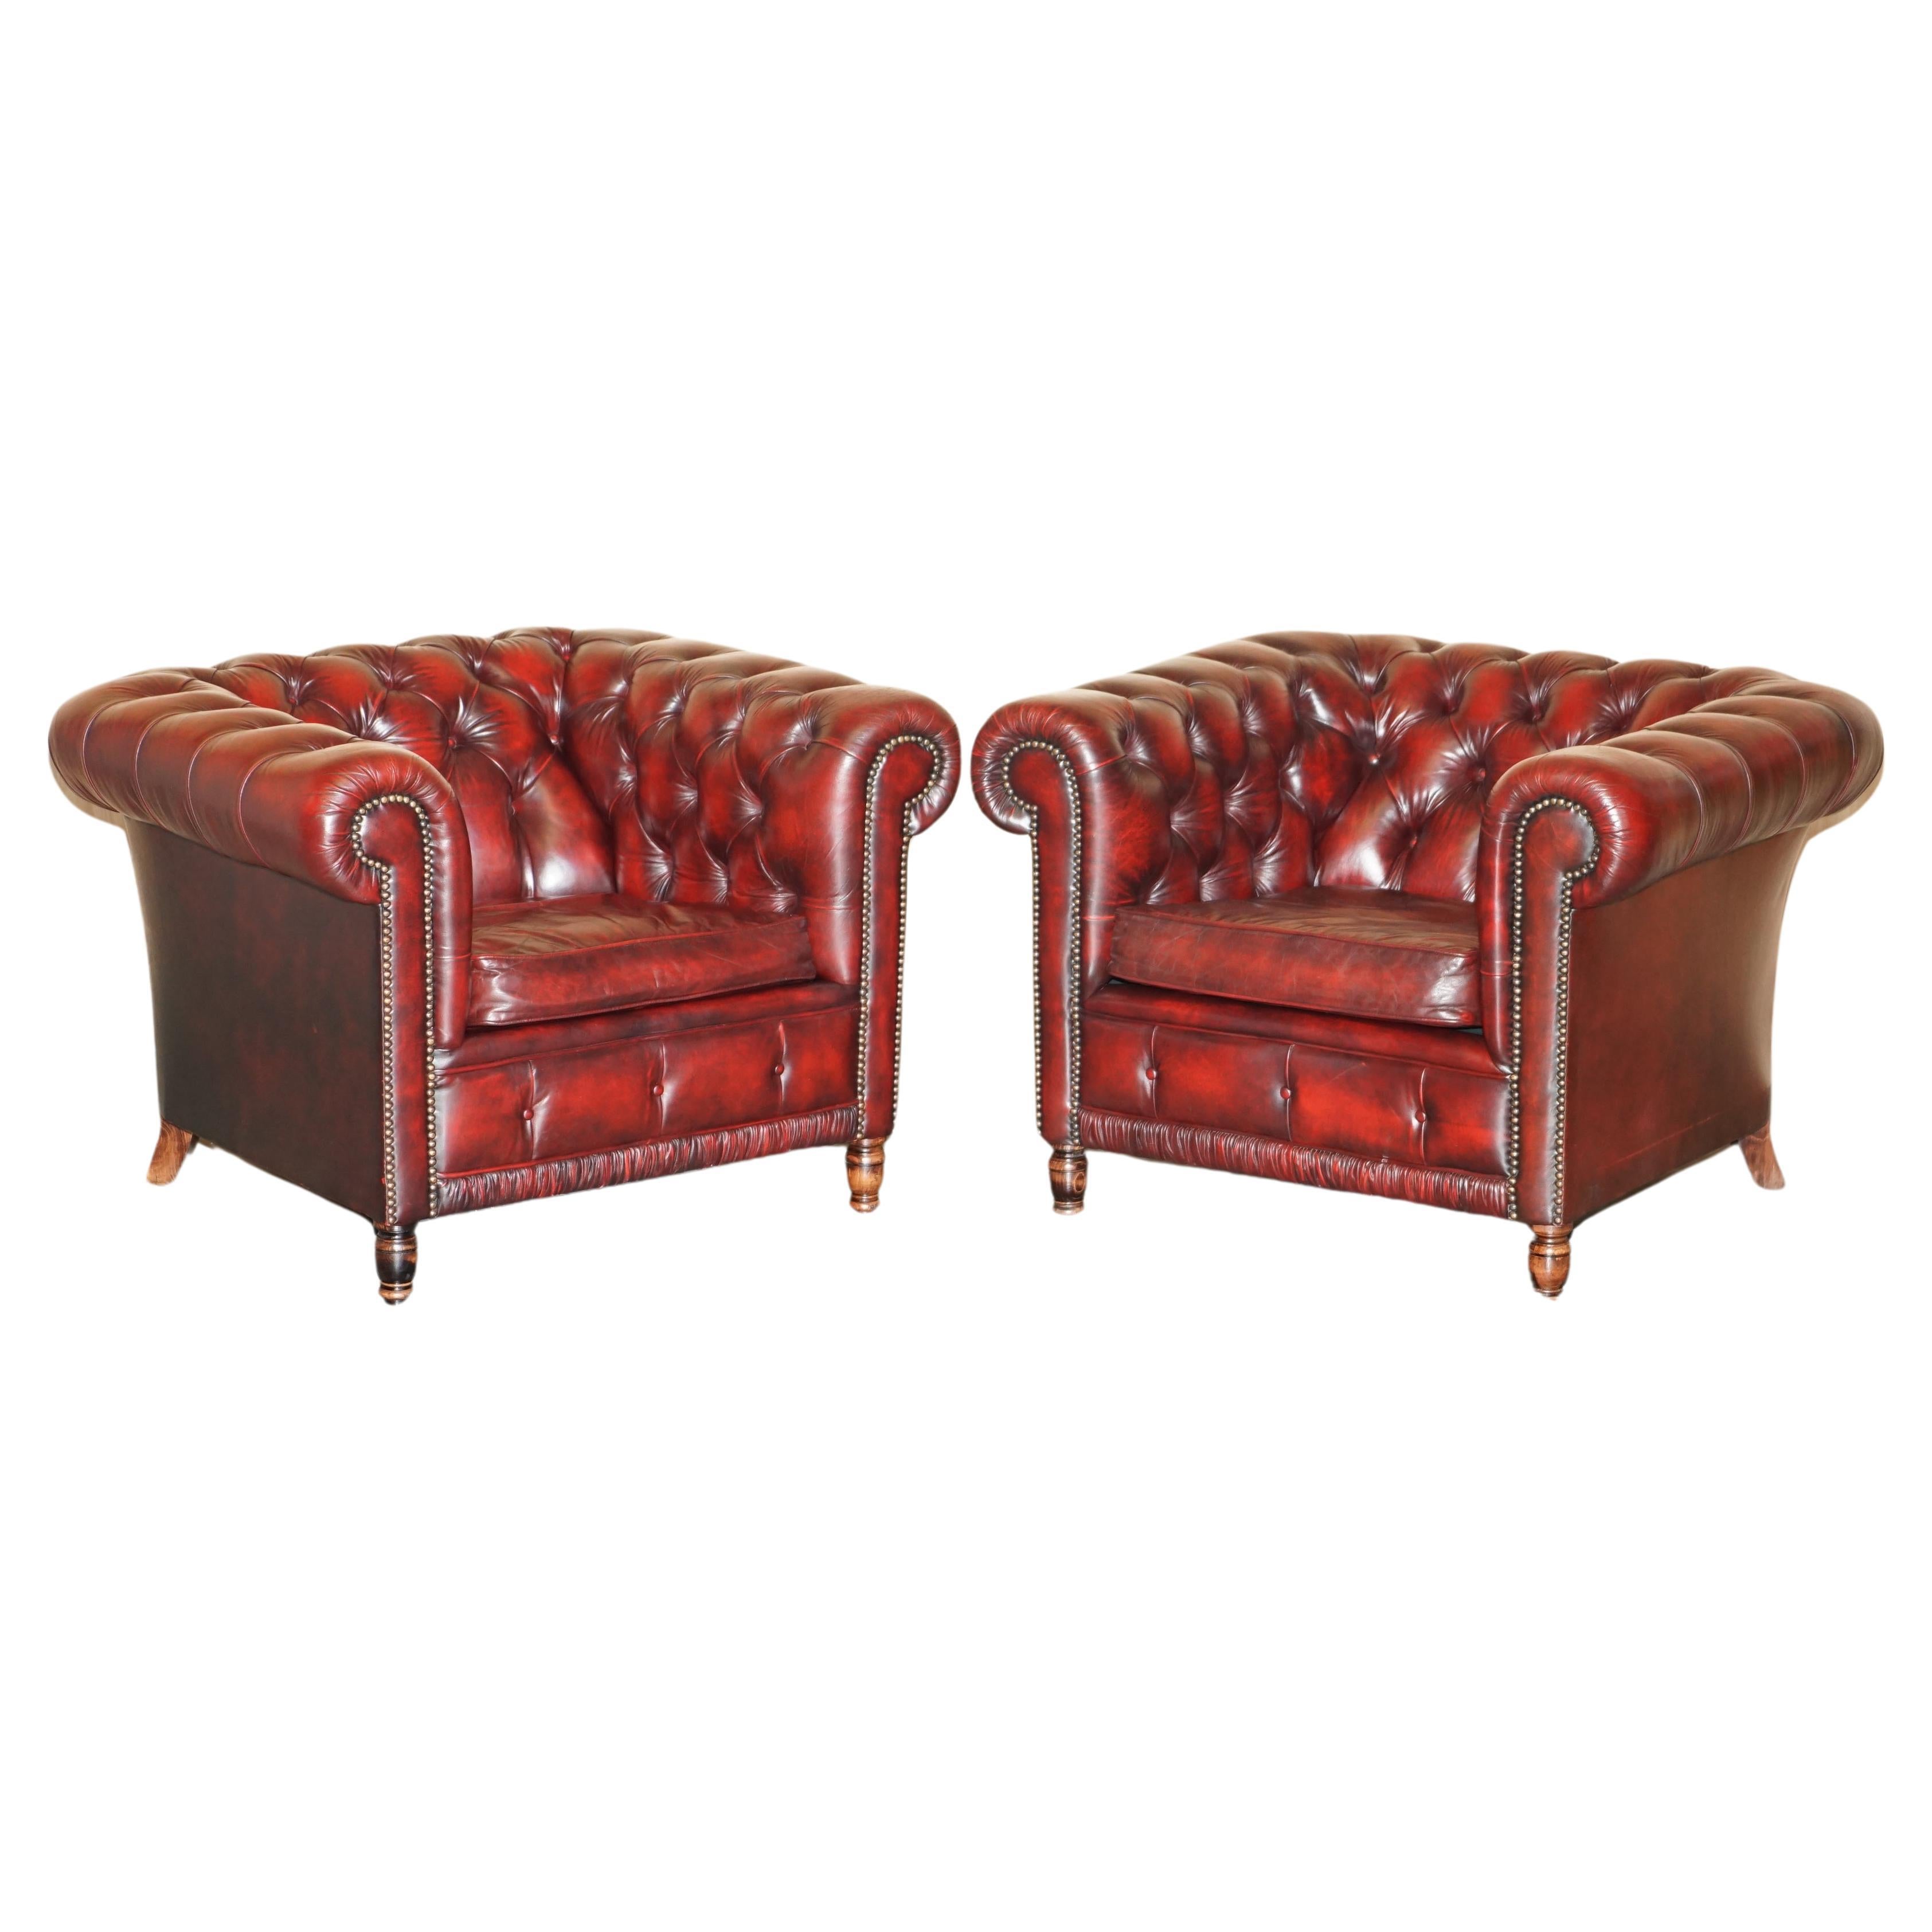 PAIR OF ViNTAGE OXBLOOD LEATHER CHESTERFIELD CLUB ARMCHAIRS WITH ELEGANT LEGS